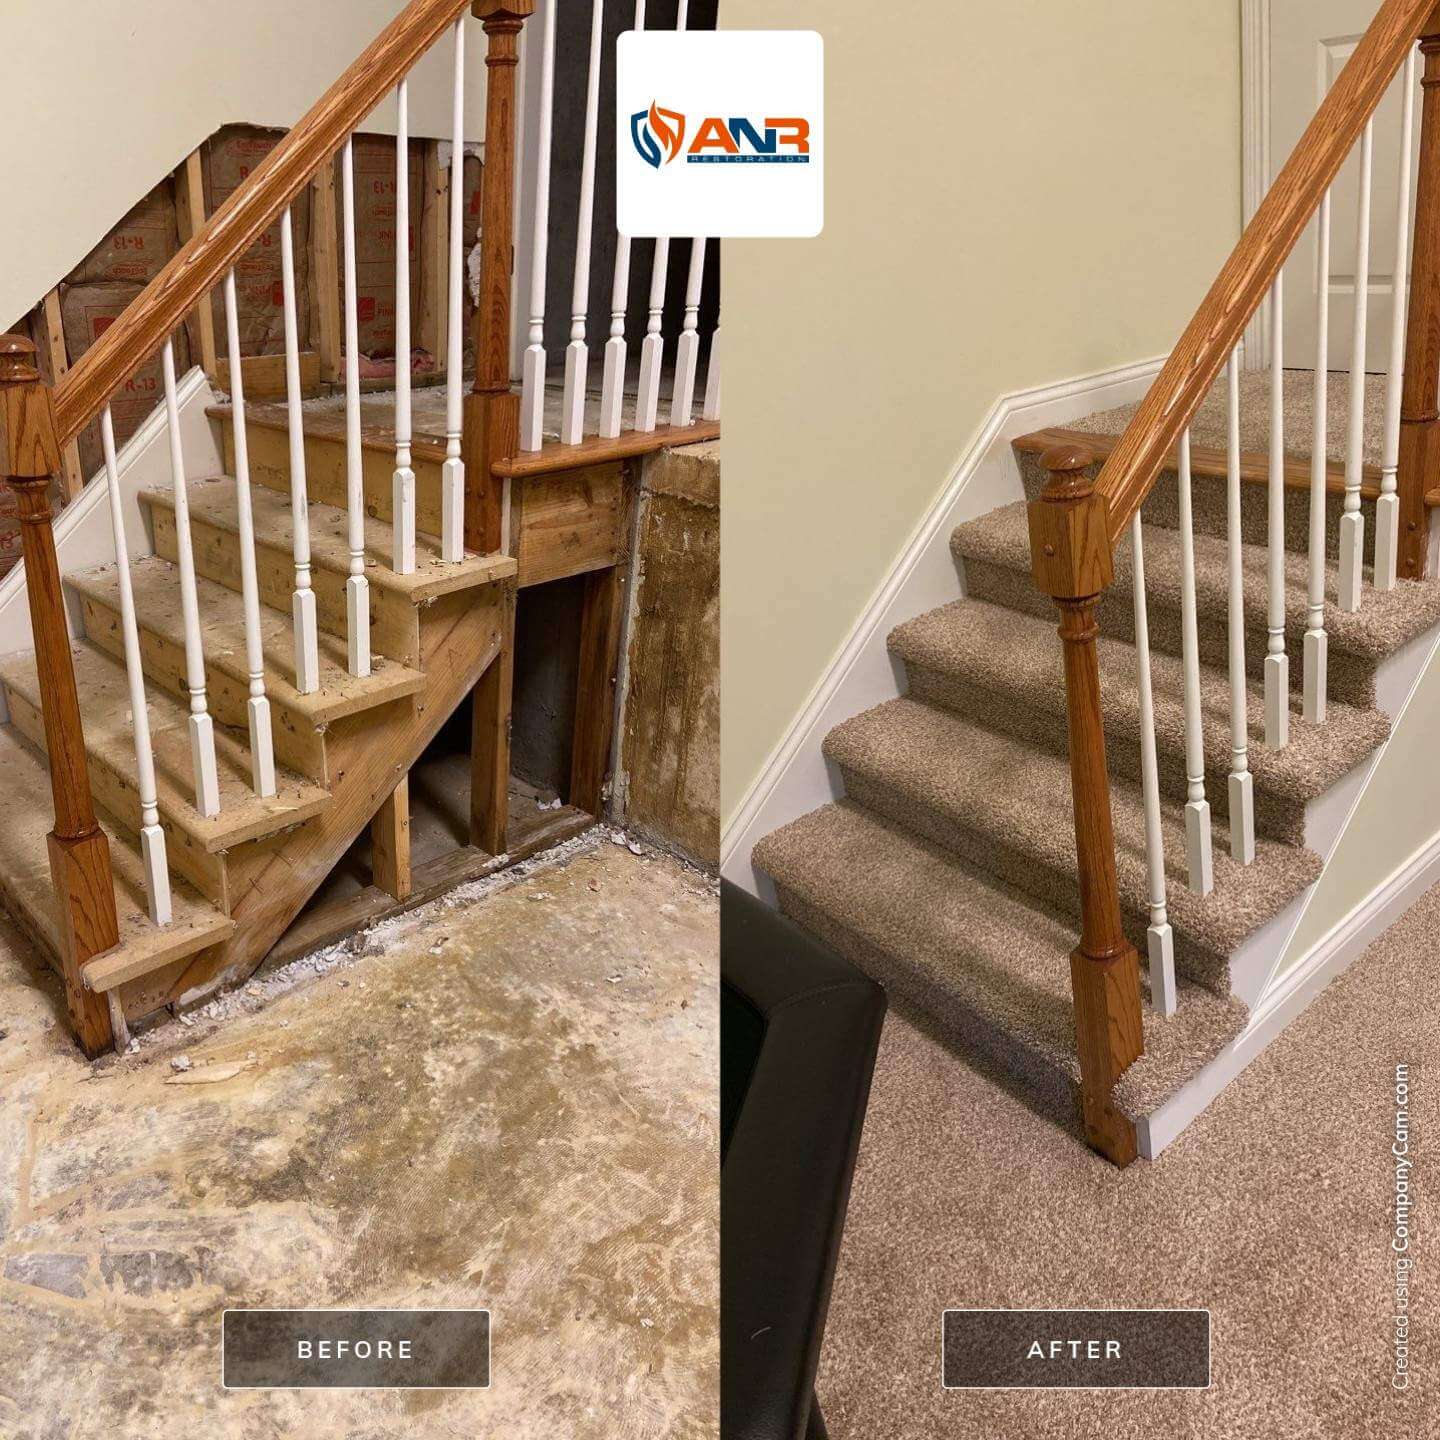 Before/After Flood Damage Cleanup, Sanitation, and Mold Removal by ANR Restoration